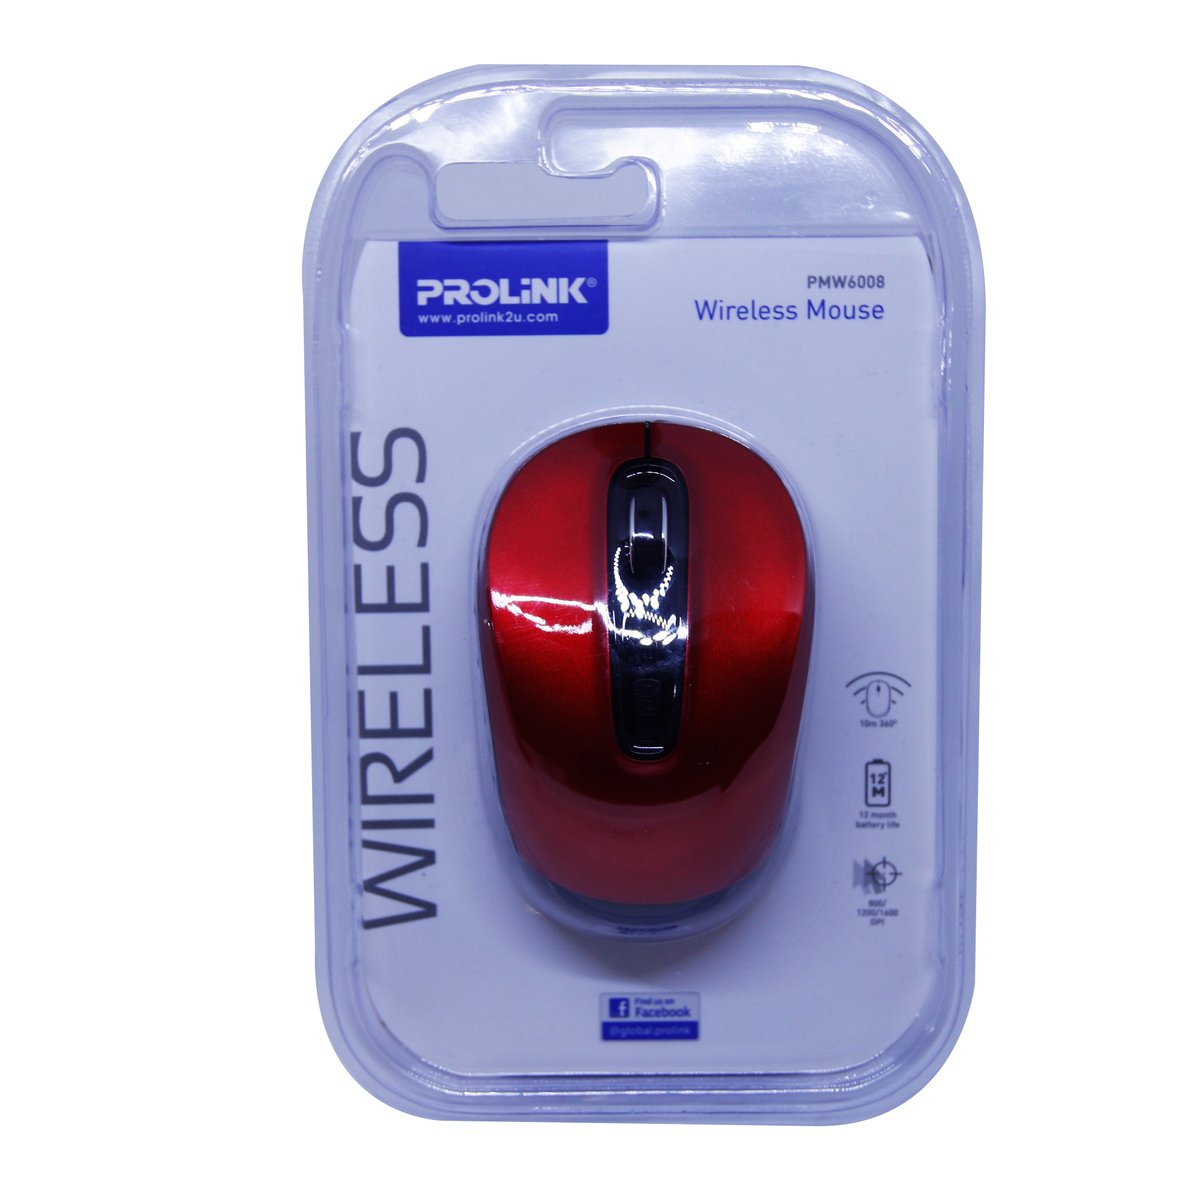 Prolink Mouse Wireless PMW6008 Red